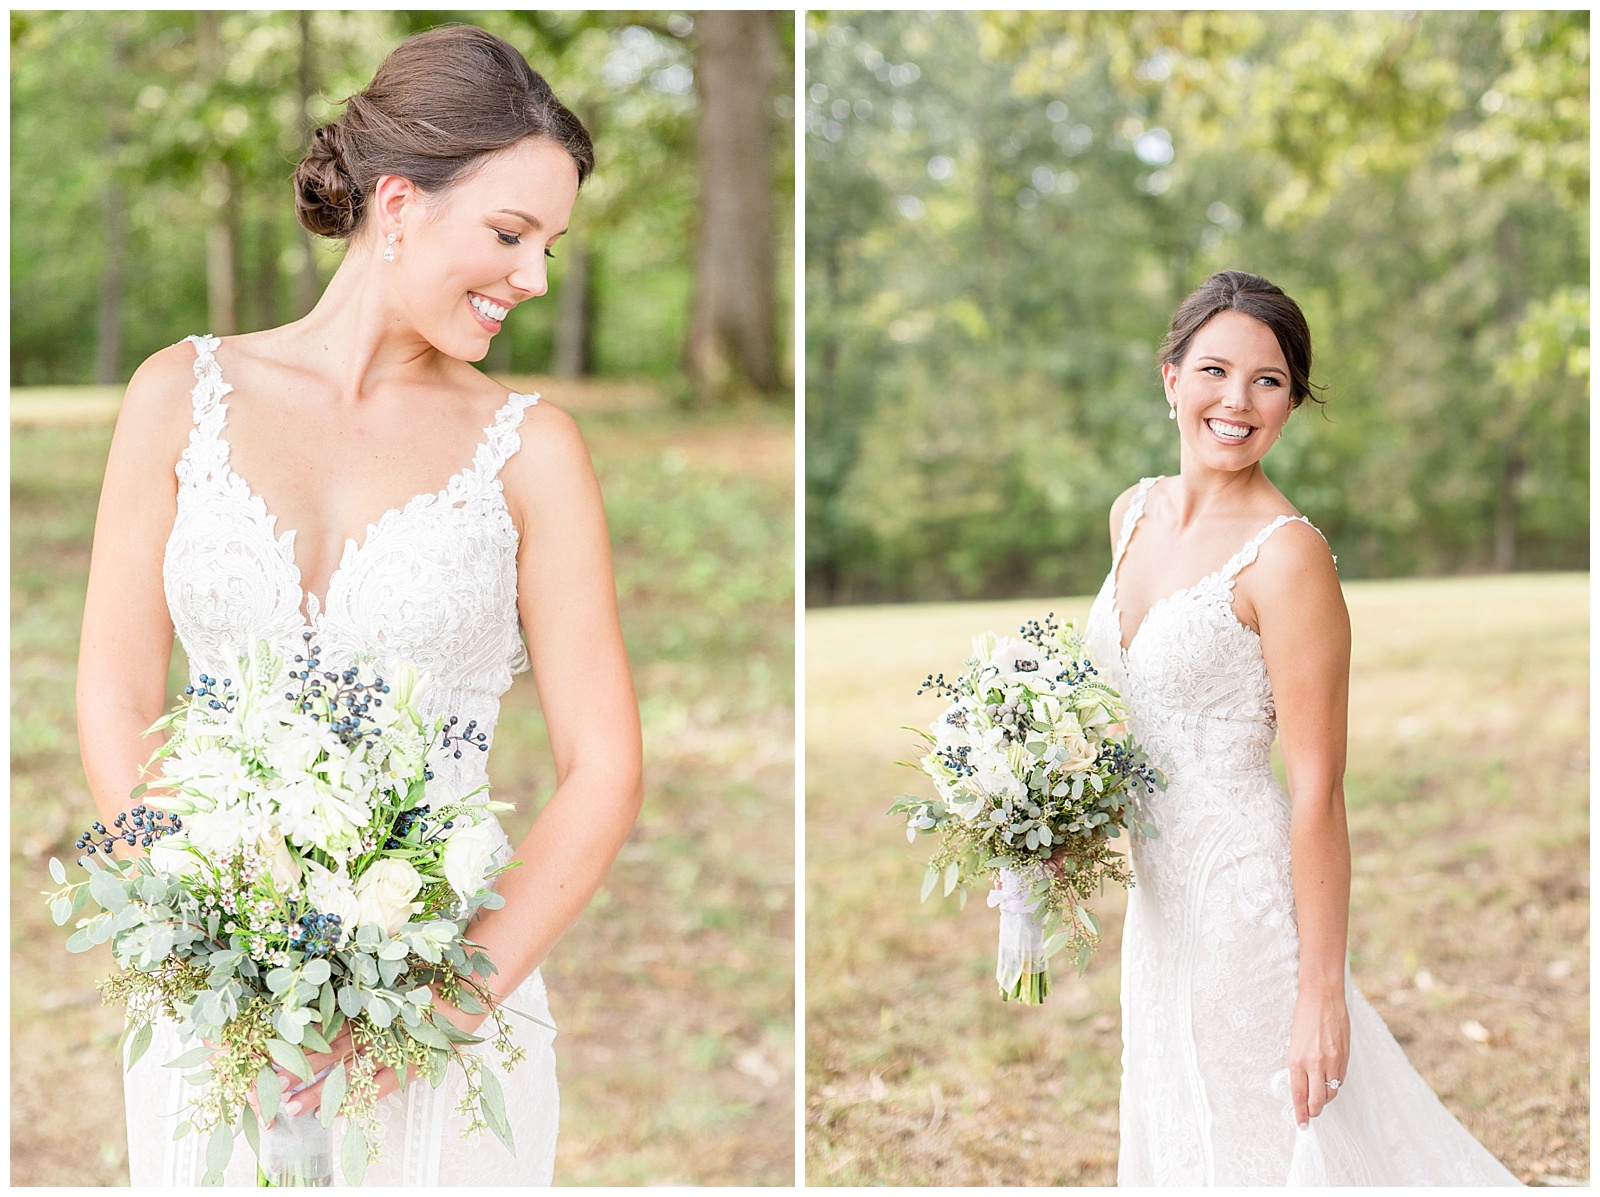 Why We Dropped Two Bright Lights | Katie & Alec Photography - Wedding Photographers in Birmingham, Alabama